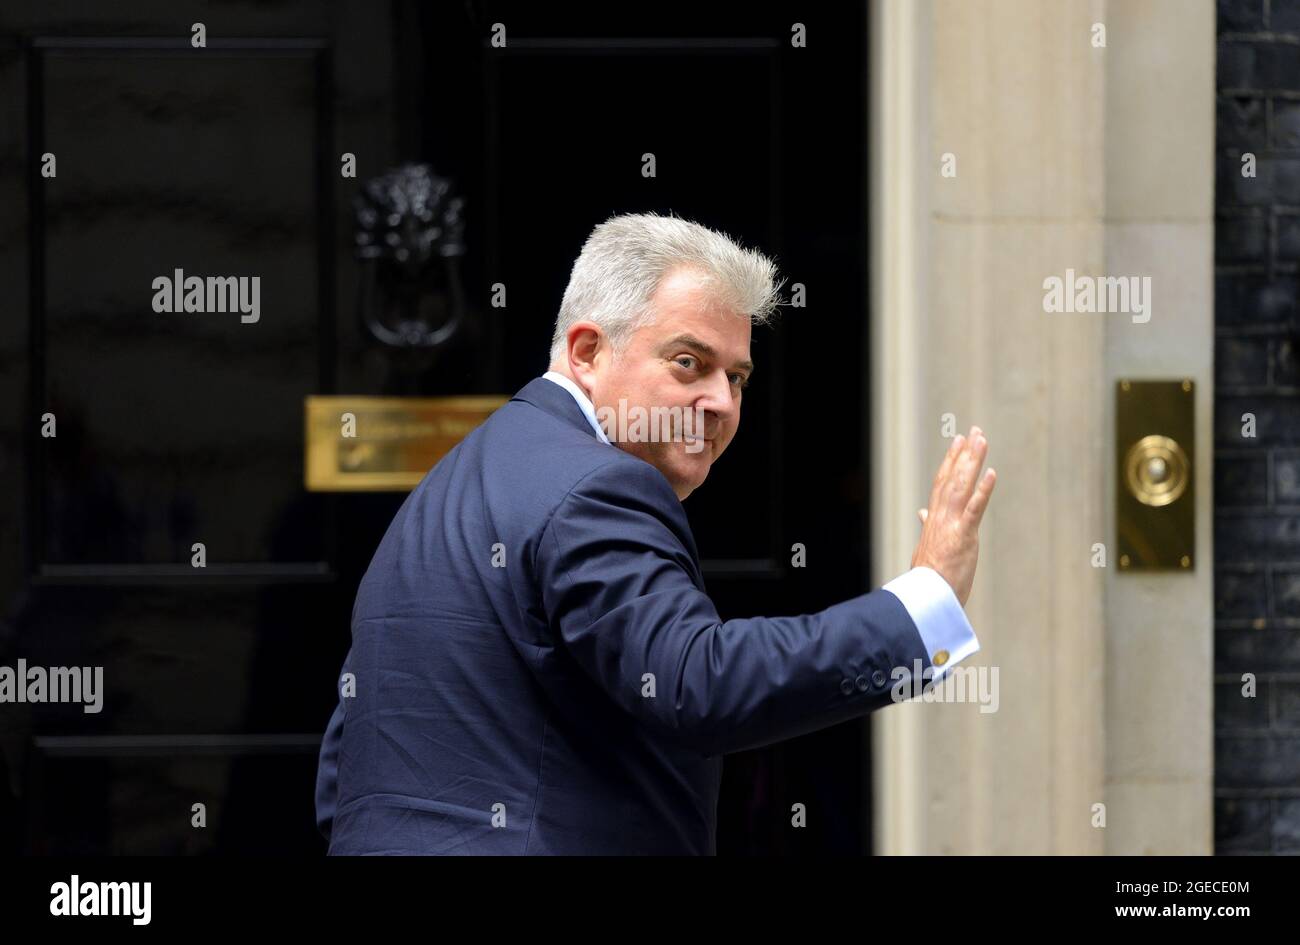 Brandon Lewis MP (Northern Ireland Secretary) in Downing Street for a meeting with the Prime Minister, 18th August 2021 Stock Photo